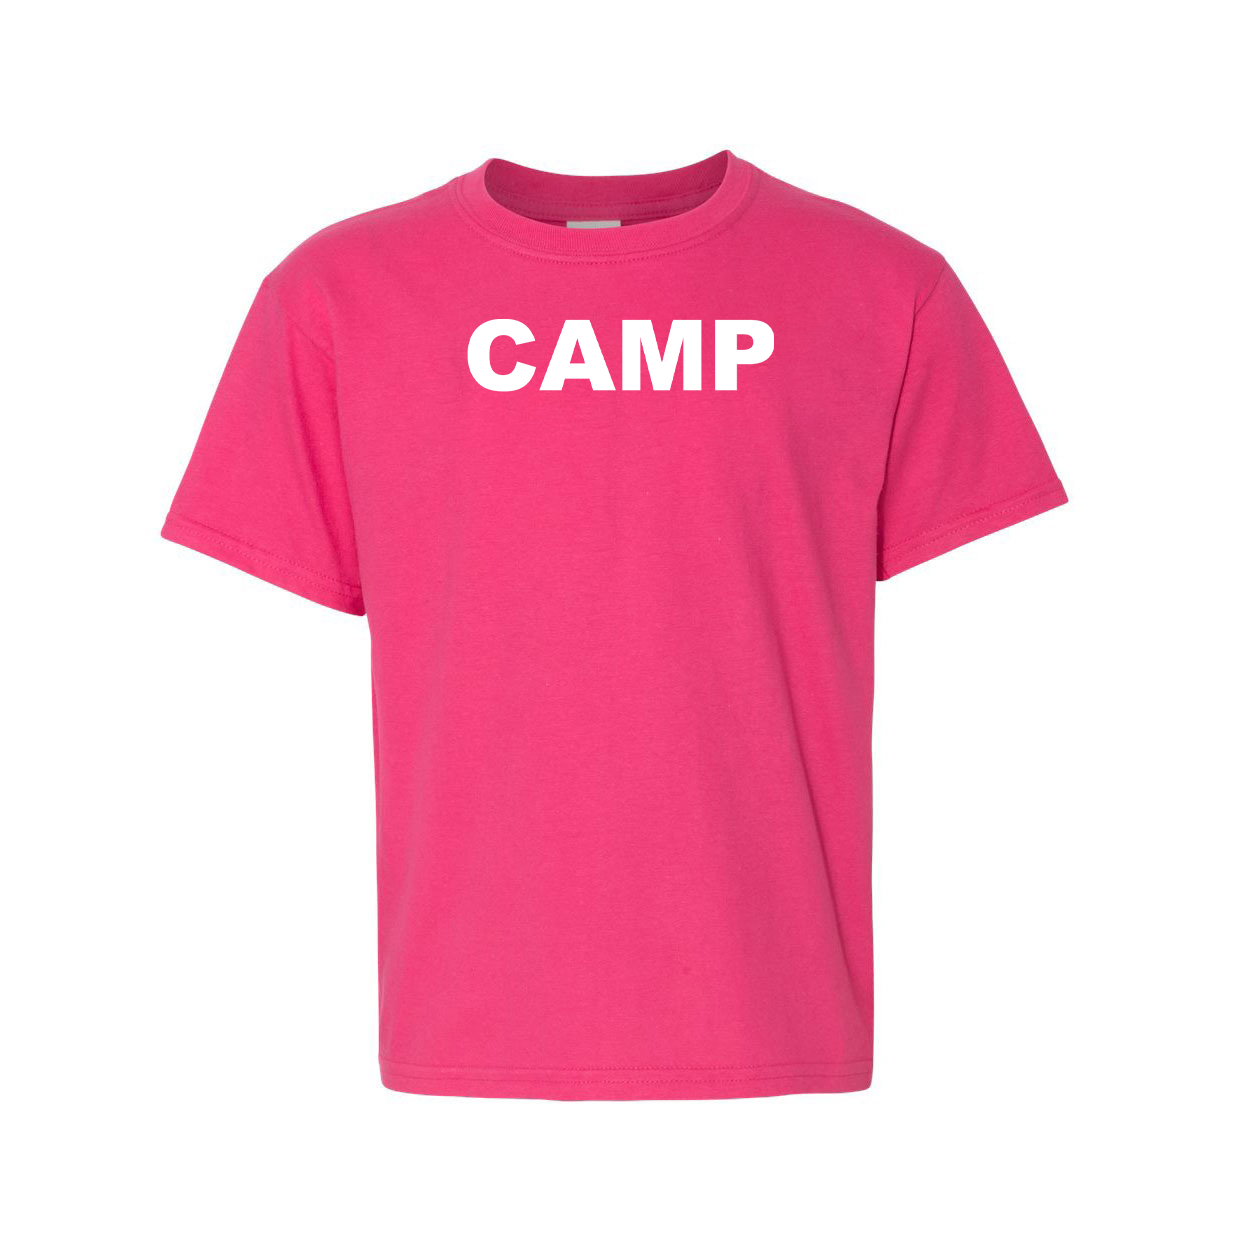 Camp Brand Logo Classic Youth T-Shirt Pink 